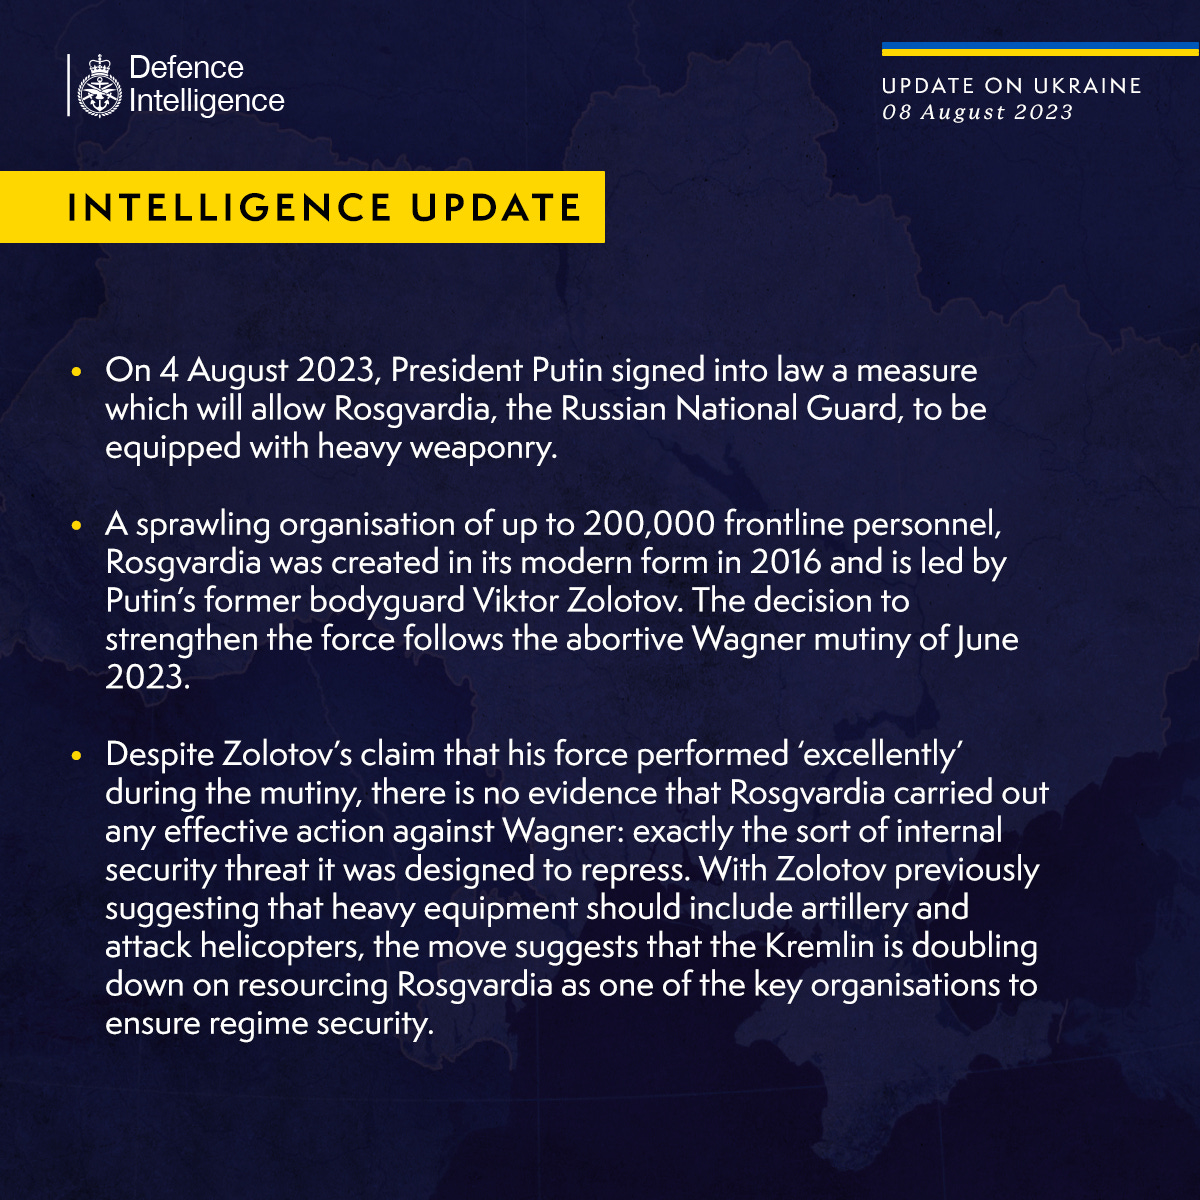 Latest Defence Intelligence update on the situation in Ukraine - 08 August 2023.